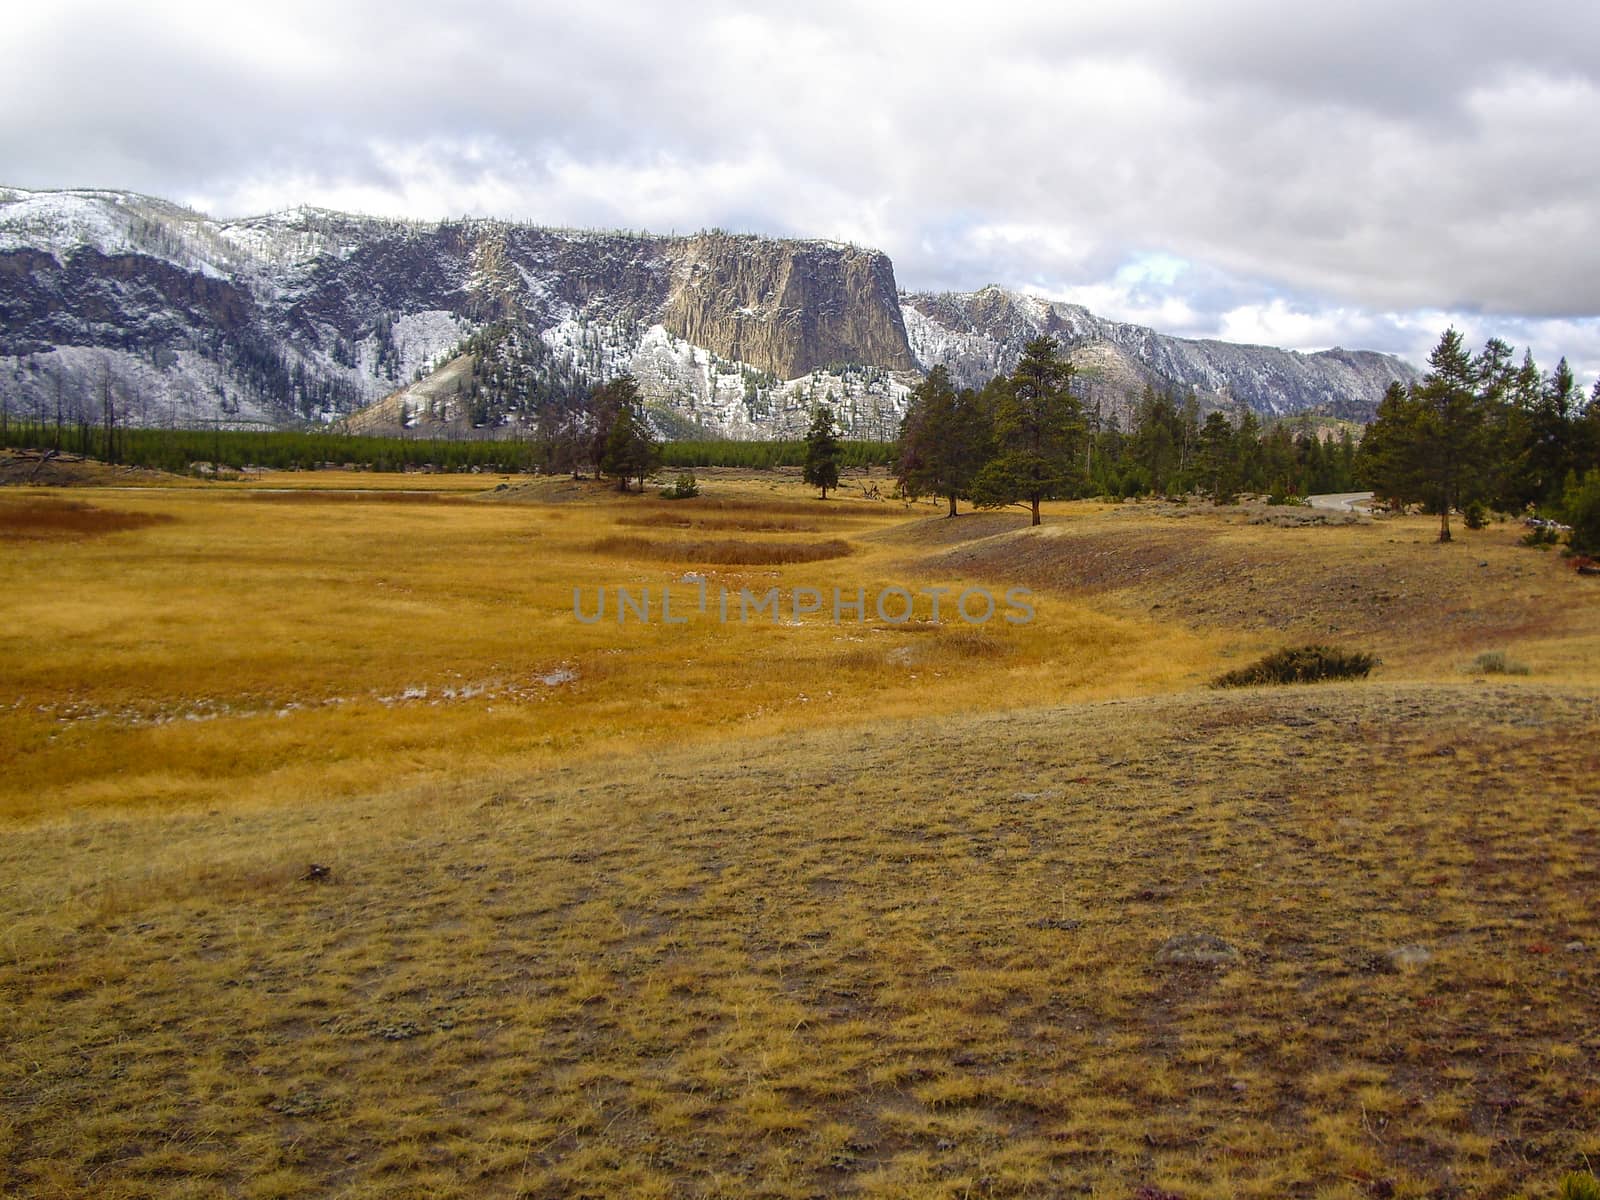 Early Winter Landscape in Yellowstone by emattil